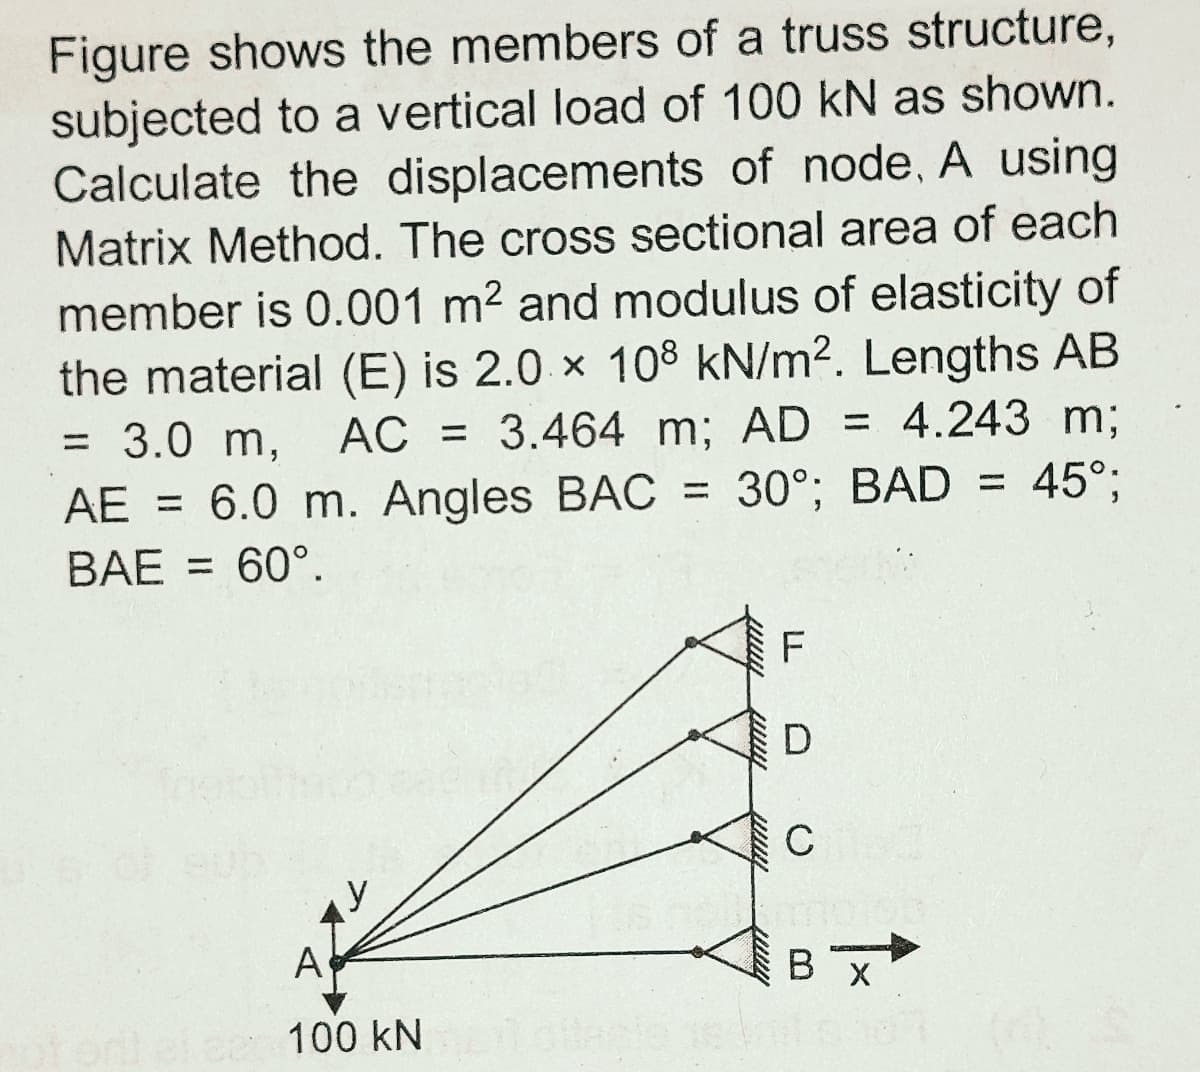 Figure shows the members of a truss structure,
subjected to a vertical load of 100 kN as shown.
Calculate the displacements of node, A using
Matrix Method. The cross sectional area of each
member is 0.001 m2 and modulus of elasticity of
the material (E) is 2.0 x 108 kN/m2. Lengths AB
= 3.0 m,
AE = 6.0 m. Angles BAC = 30°; BAD = 45°;
AC = 3.464 m; AD = 4.243 m;
%3D
BAE = 60°.
C
A
В х
100 kN
